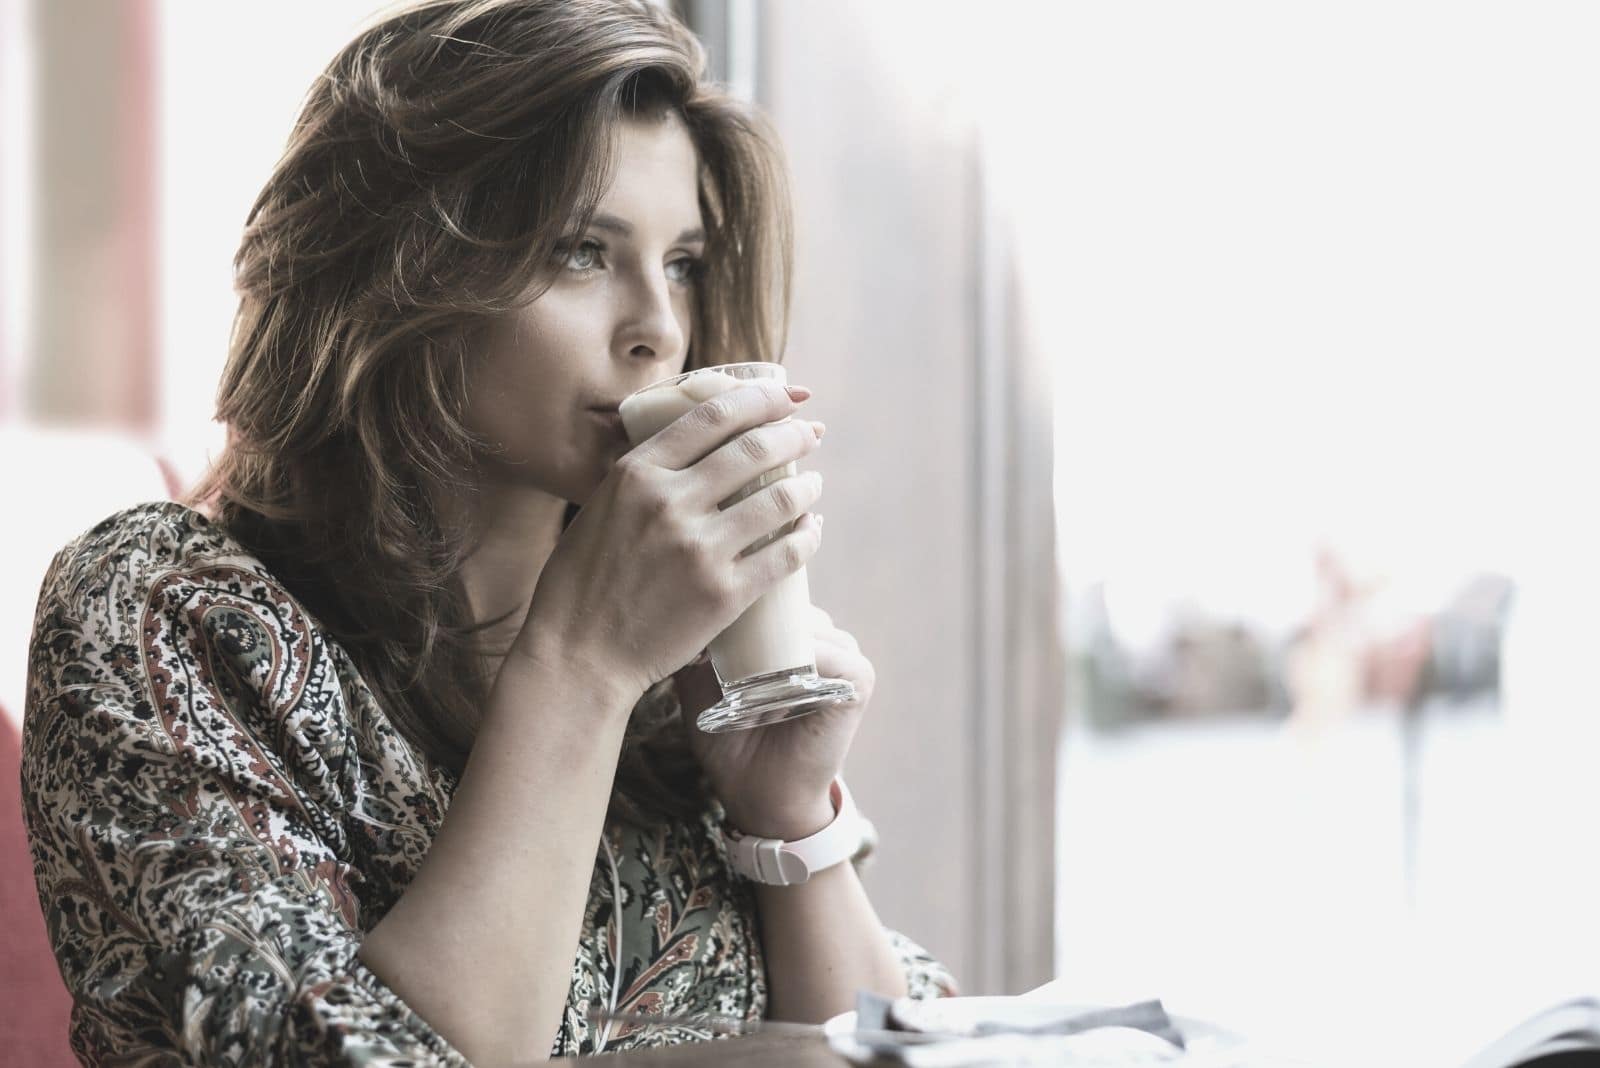 beautiful elegant woman thinking deeply inside a cafe sipping a cold latte